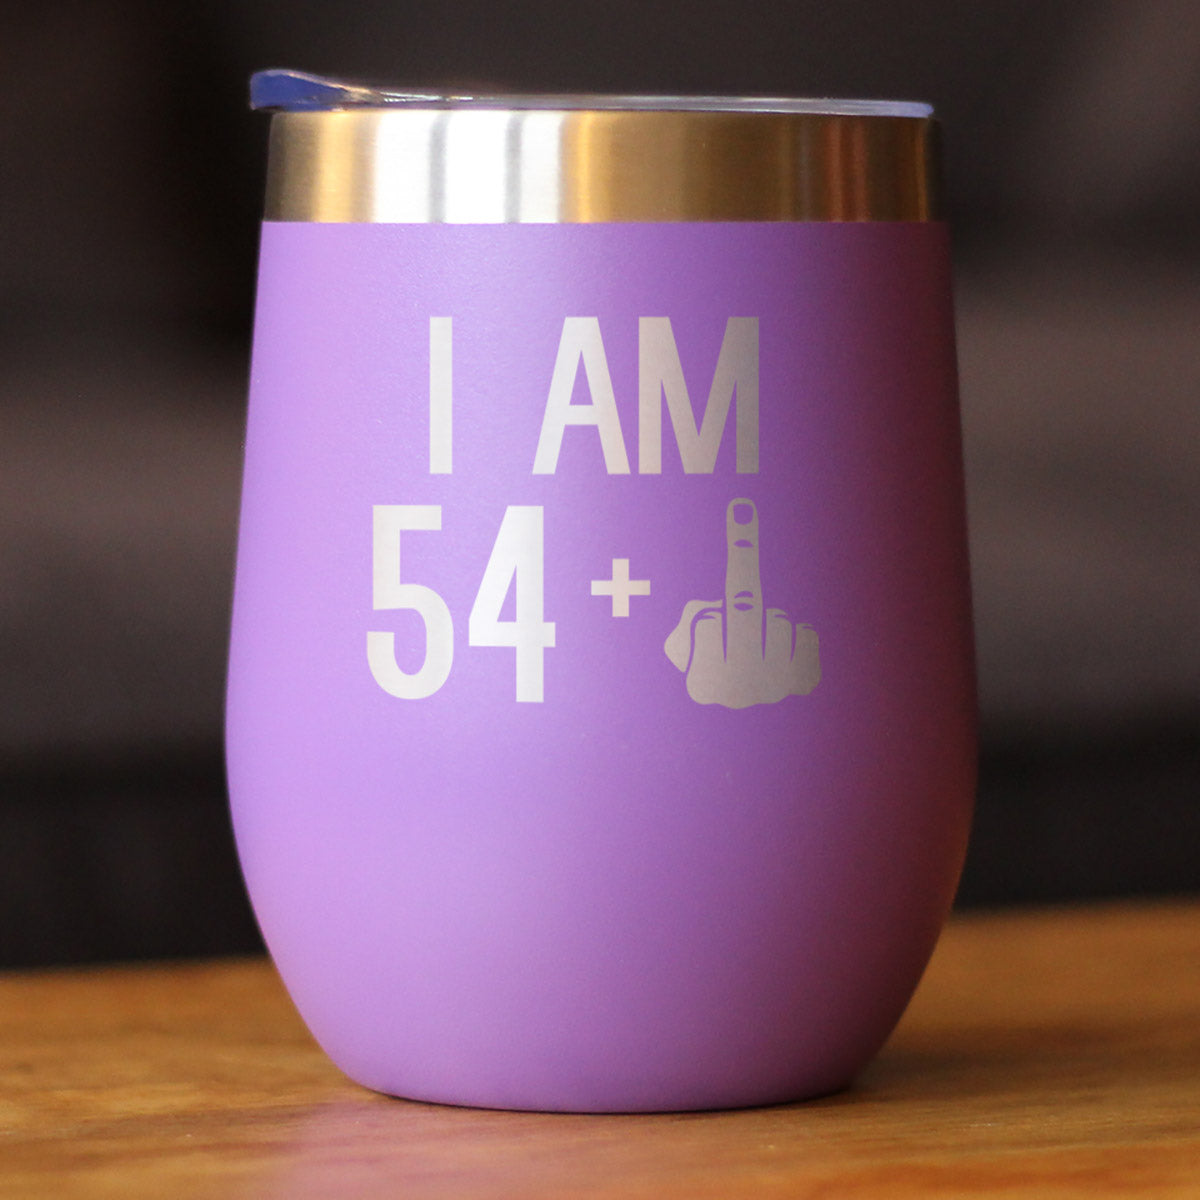 54 + 1 Middle Finger - Wine Tumbler - Cute Funny 55th Birthday Gift for Women or Men Turning 55